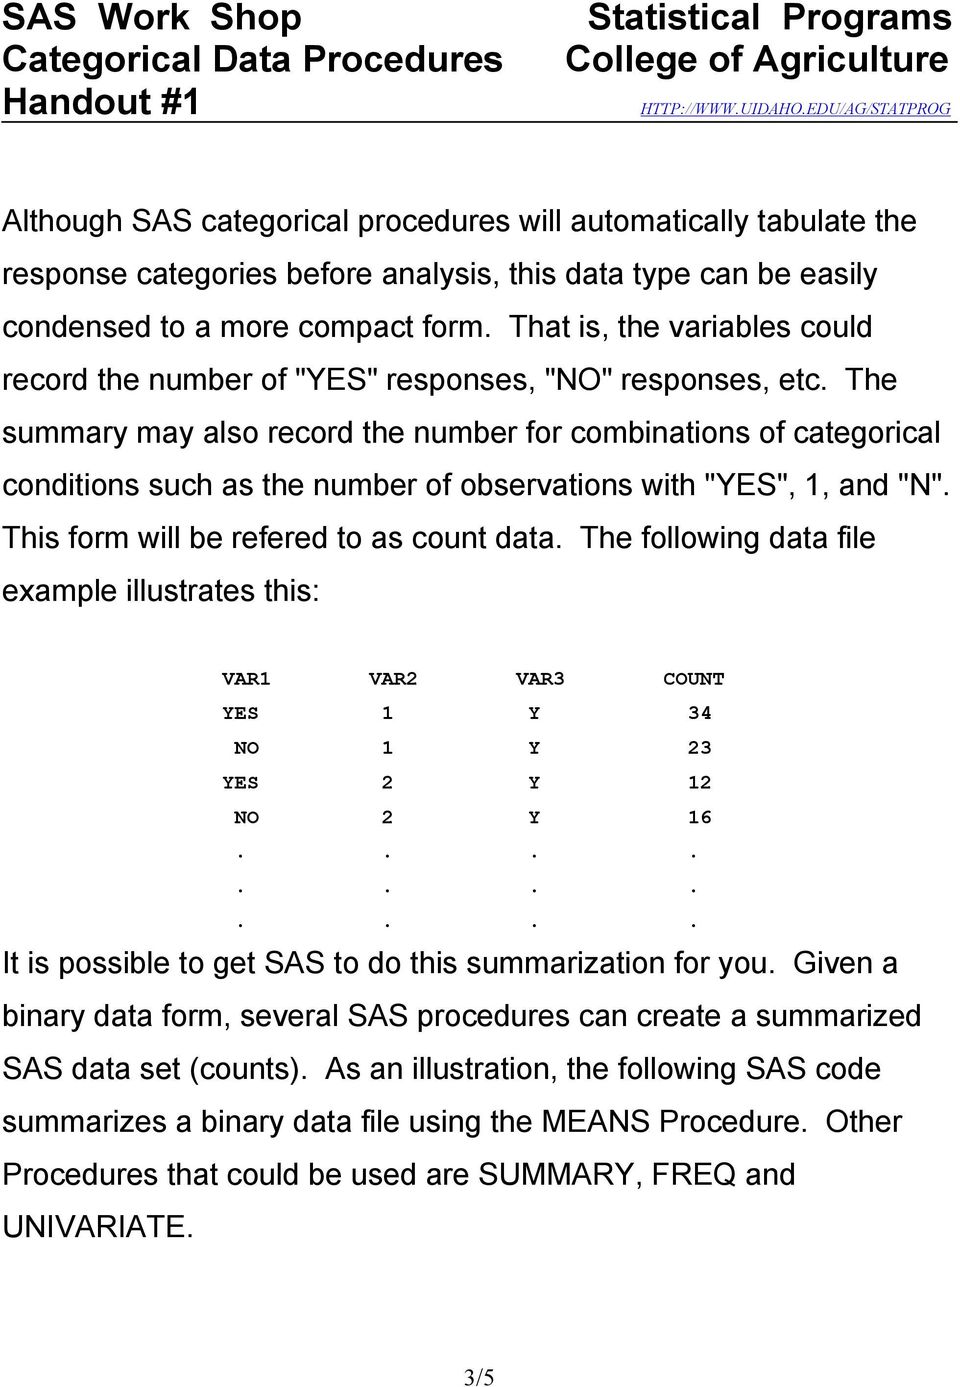 The summary may also record the number for combinations of categorical conditions such as the number of observations with "YES", 1, and "N". This form will be refered to as count data.